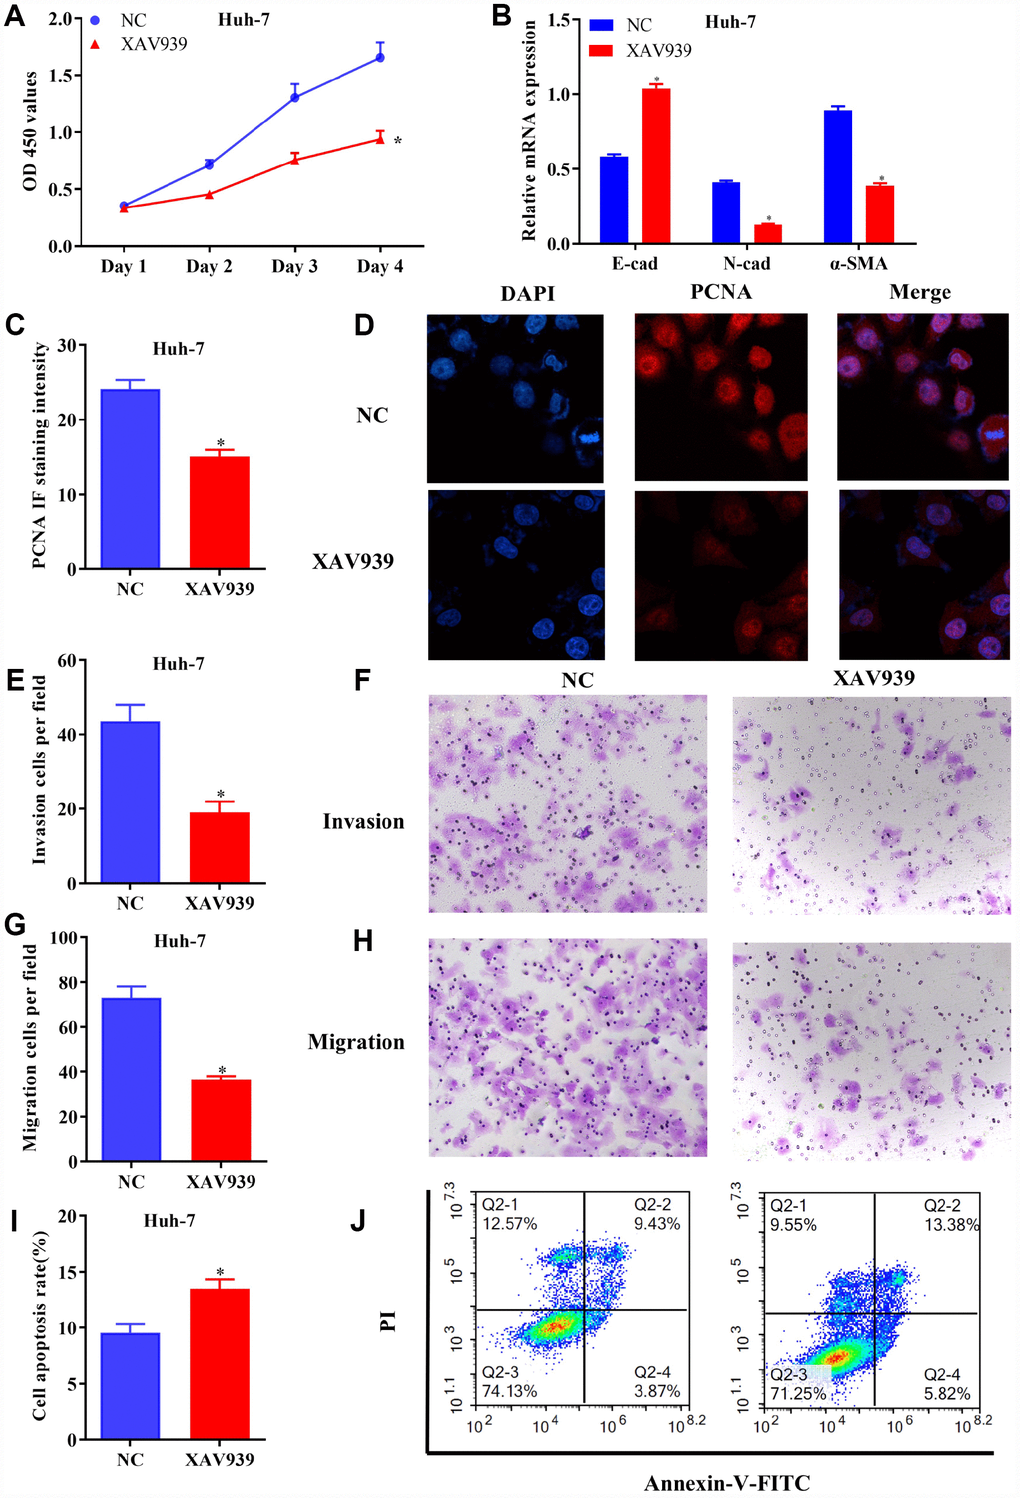 Blockage of Wnt/β-catenin signaling inhibited growth and metastasis of HCC cells. (A) The proliferation of Huh-7 cells treated with XAV939 was determined by CCK-8 assay. (B) The mRNA levels of E-cad, N-cad and α-SMA in transfected HCC cells were examined using RT-qPCR. (C and D) The expression of PCNA in Huh-7 cells were evaluated following the treatment with XAV939. (E to H) The invasive and migrative abilities of HCC cells treated with XAV939 were assessed by Transwell assay (magnificationx100). (I and J) Cell apoptosis following the treatment with XAV939 was determined using flow cytometry. The results were represented as mean ± SD. P